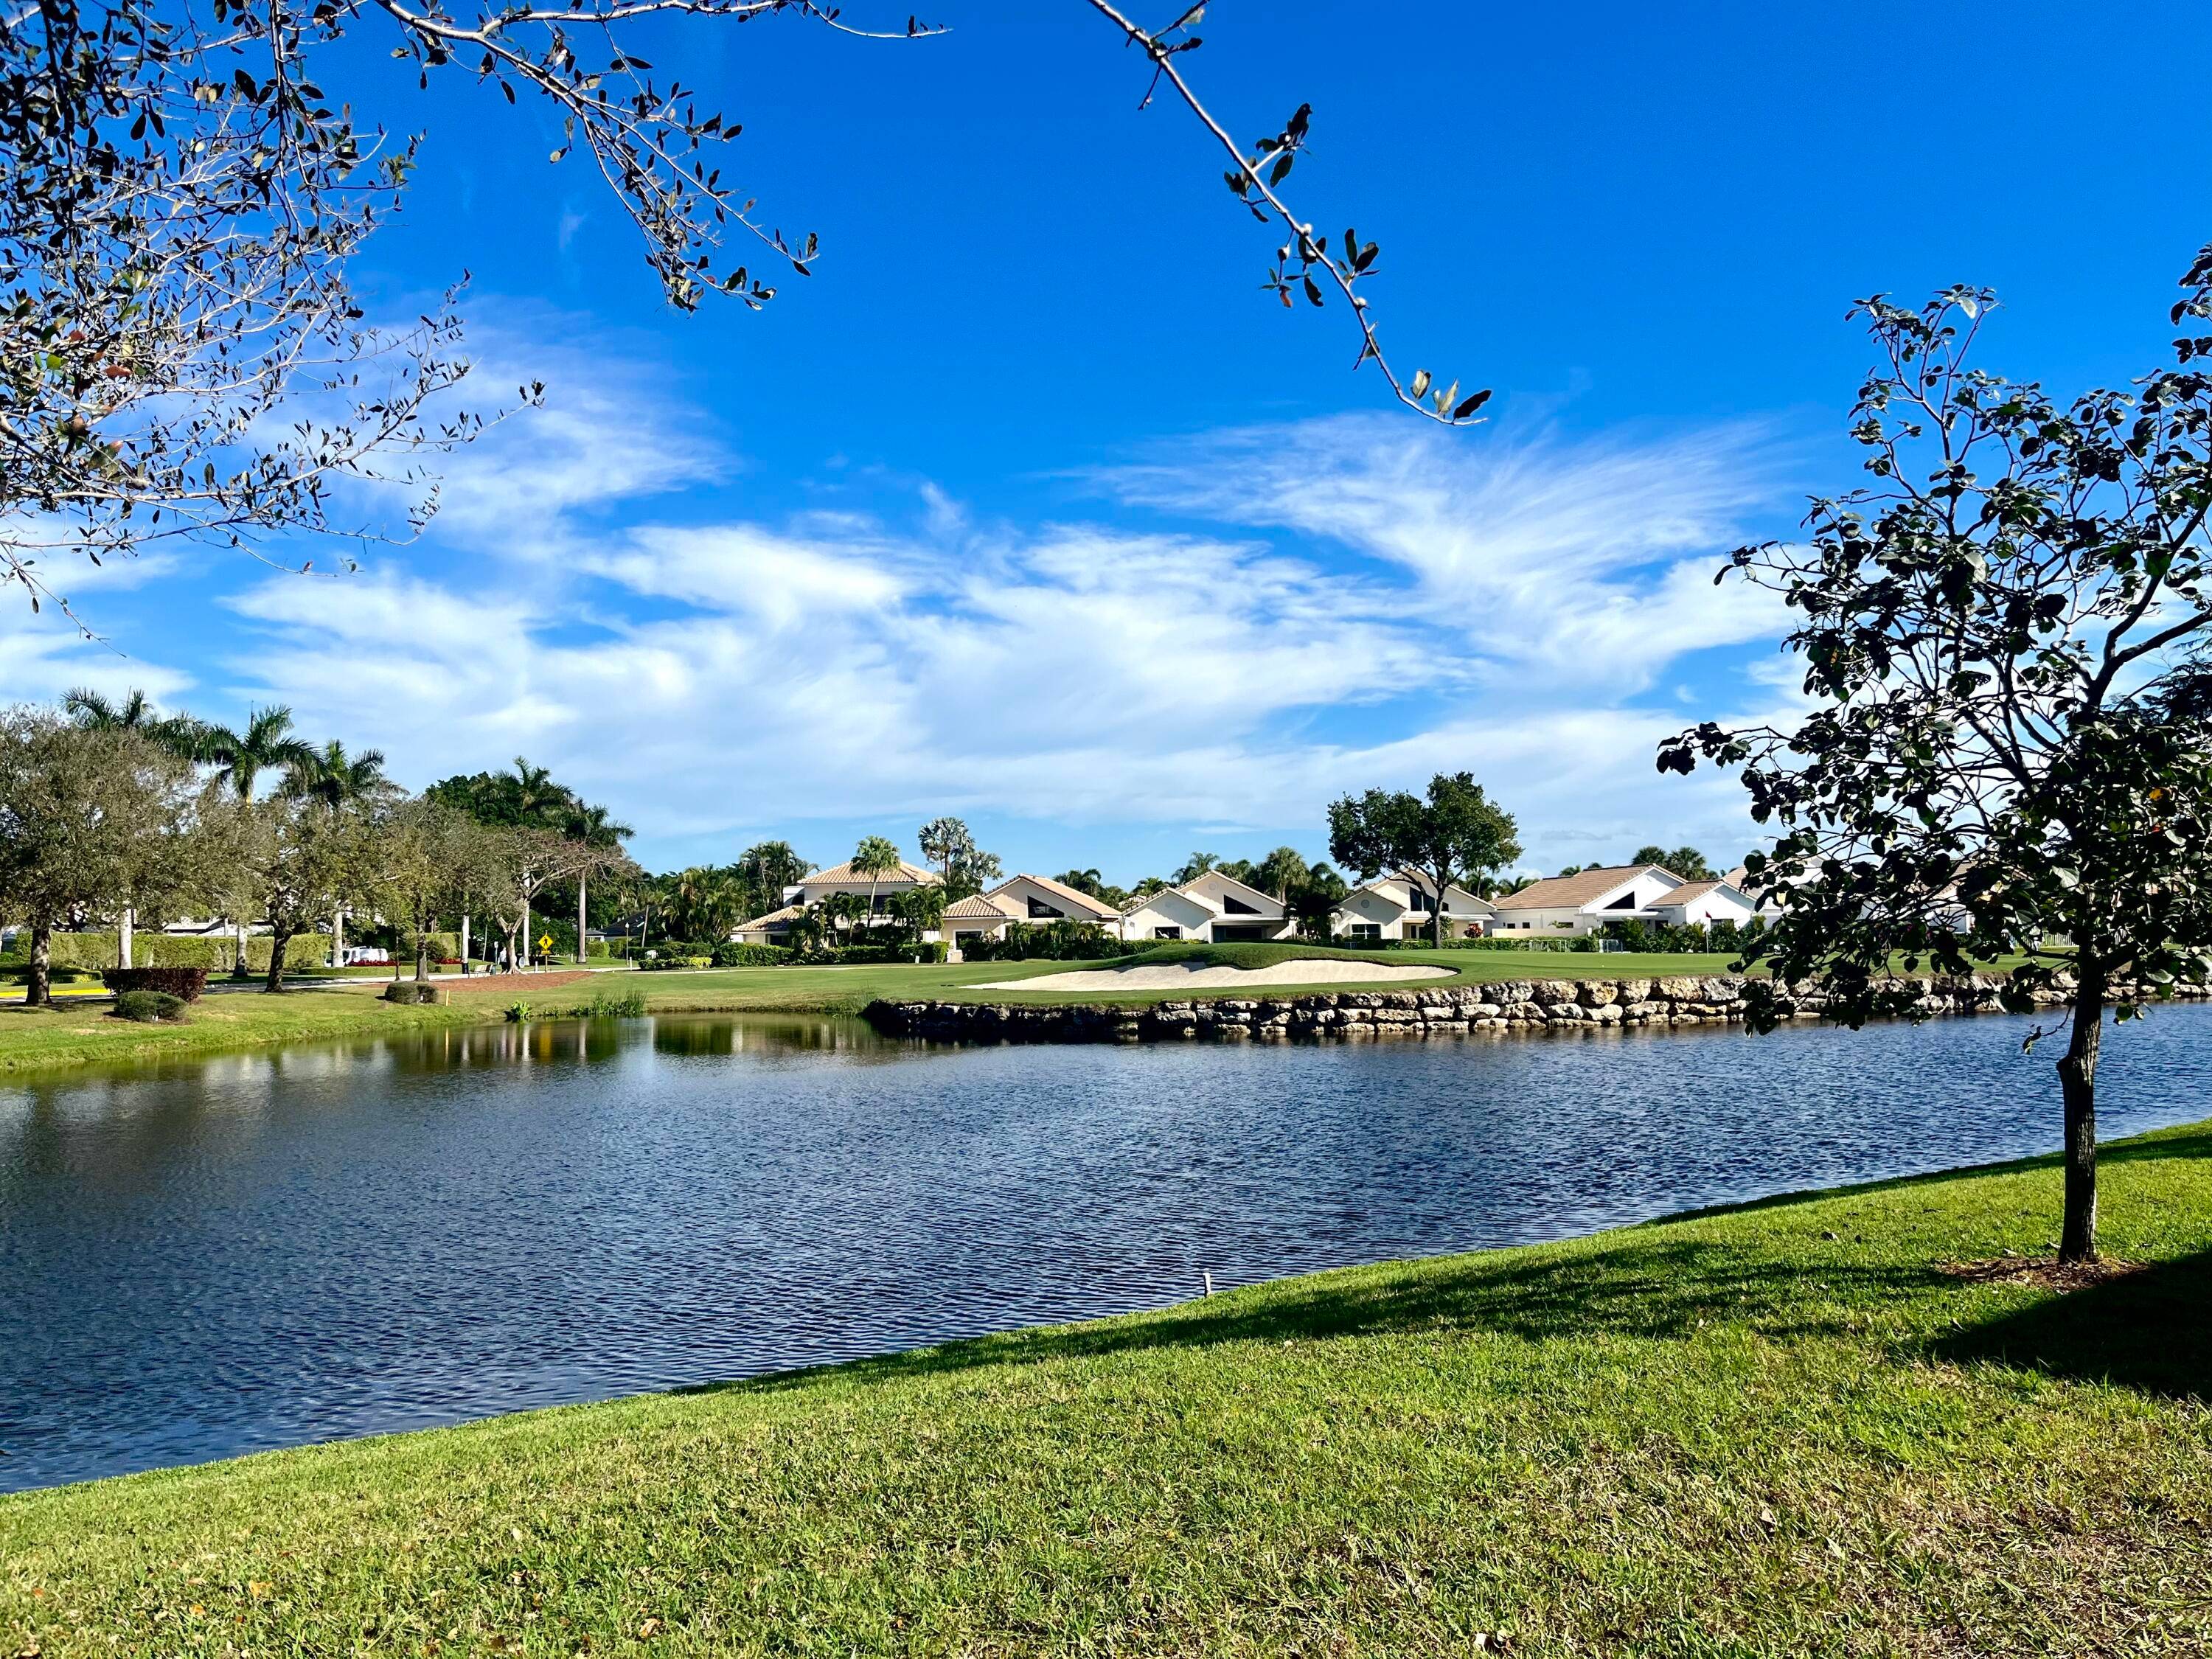 Experience luxury living in this fully renovated first floor condo, boasting a prime location overlooking both the serene lake and lush golf course.